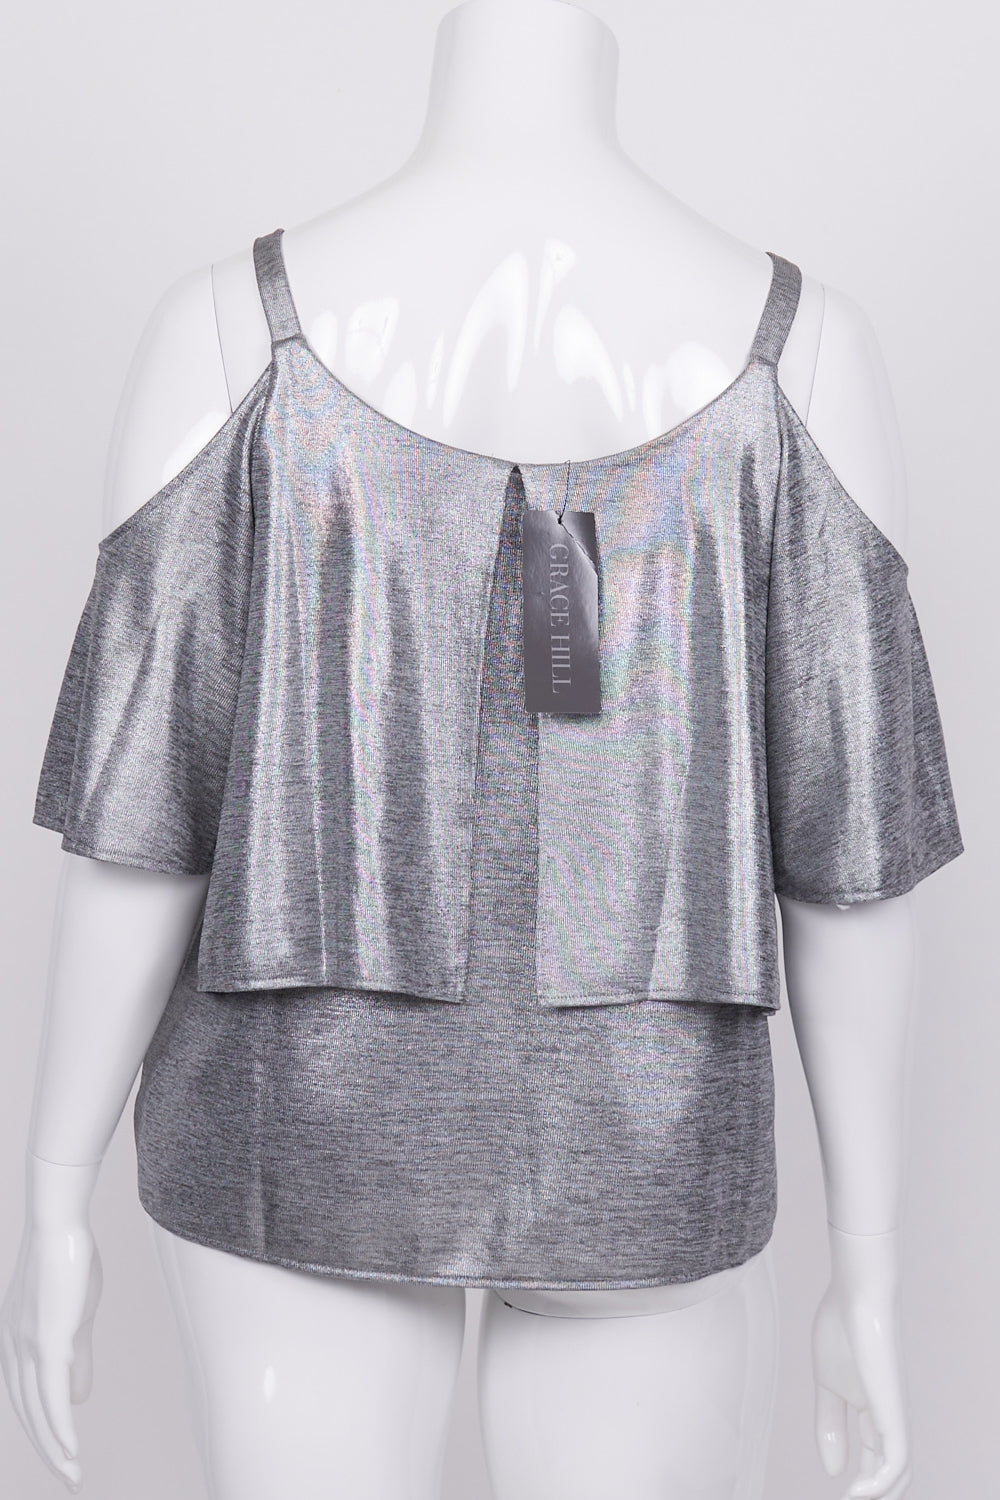 Grace Hill Silver Layer Top 14